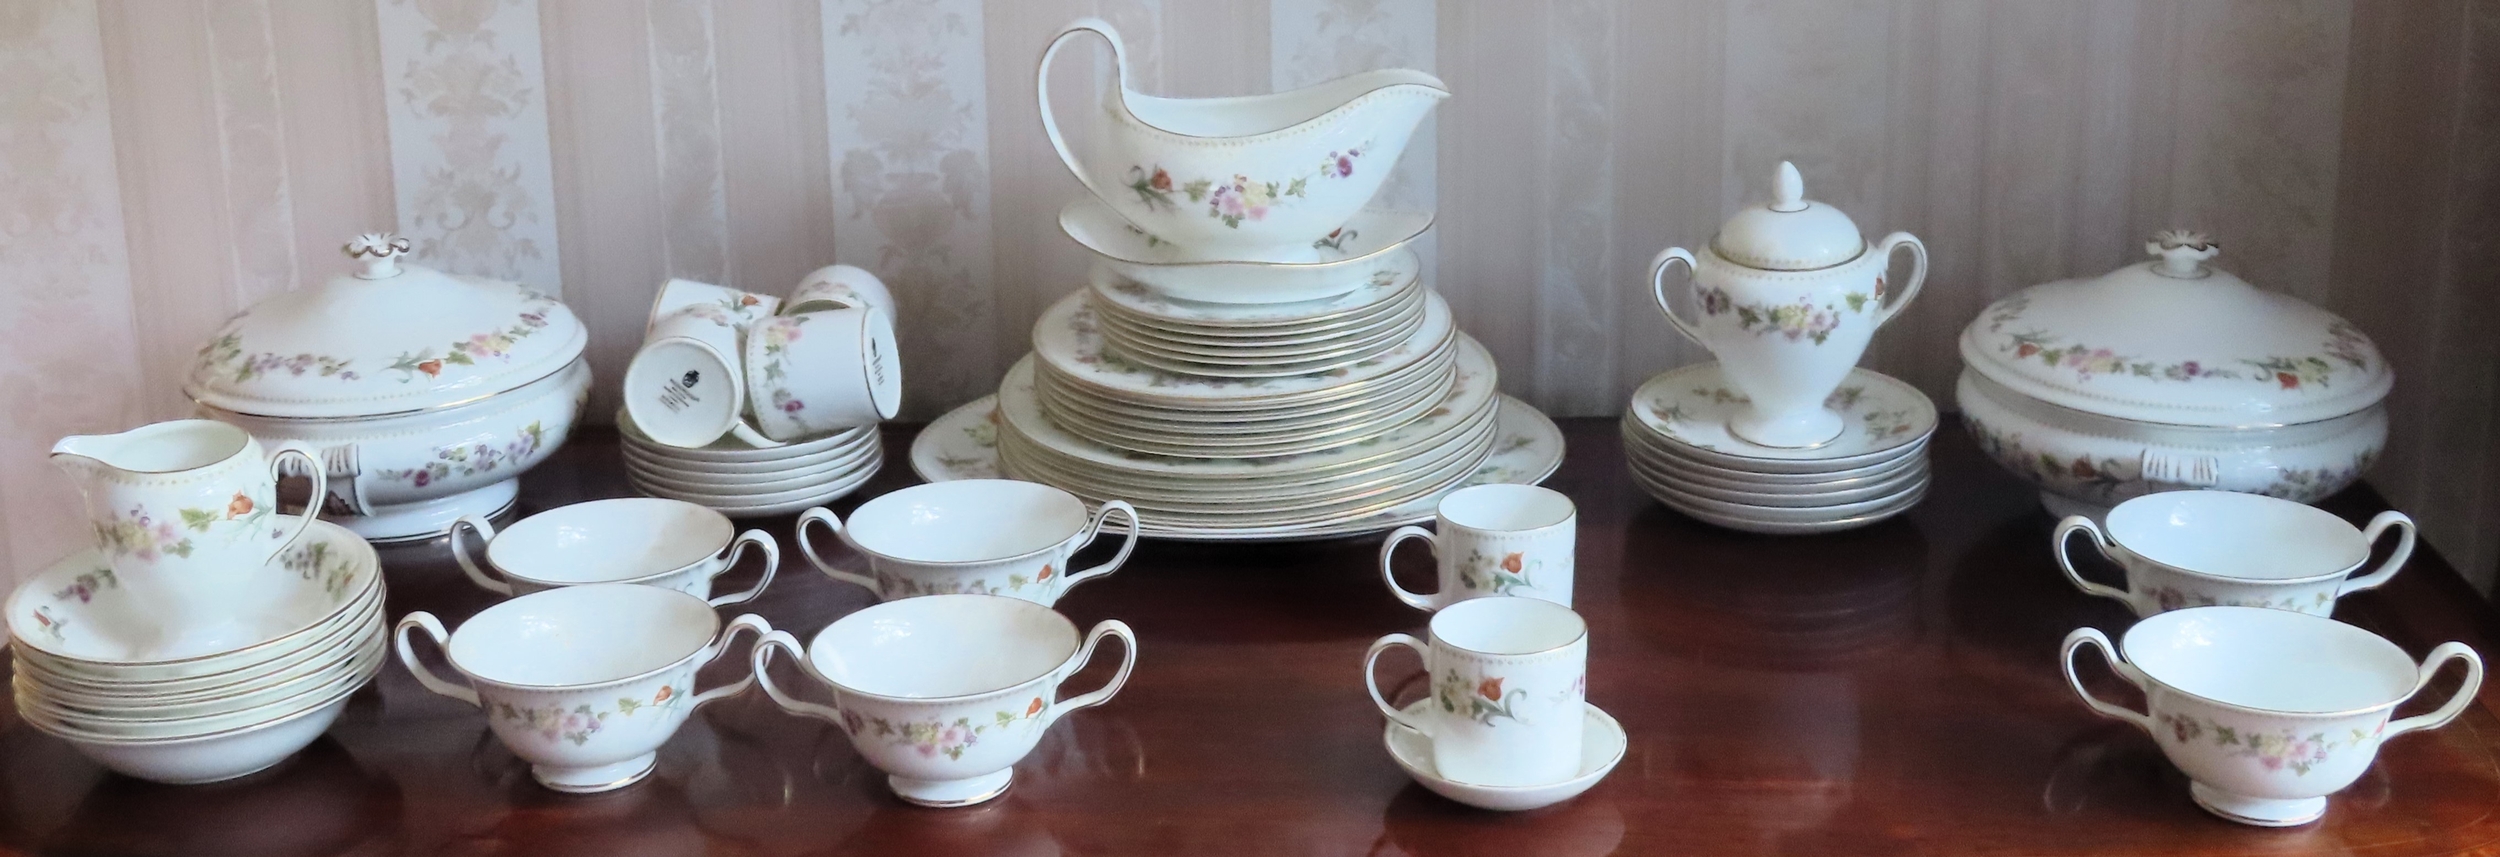 Large quantity of Wedgwood Mirabelle dinnerware. Approx. 50+ pieces All in used condition, unchecked